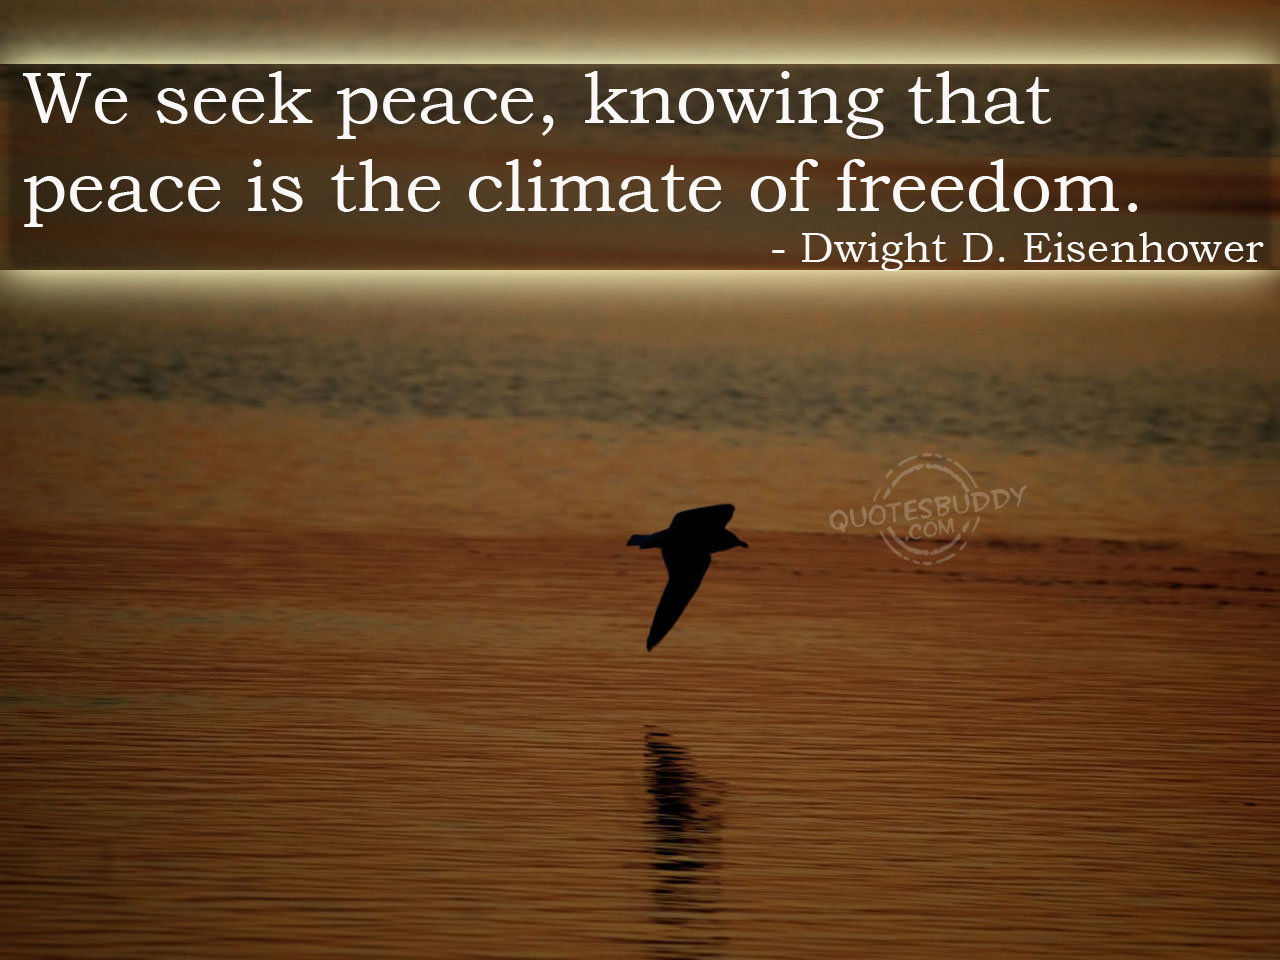 We seek peace, knowing that peace is the climate of freedom. Dwight D. Eisenhower